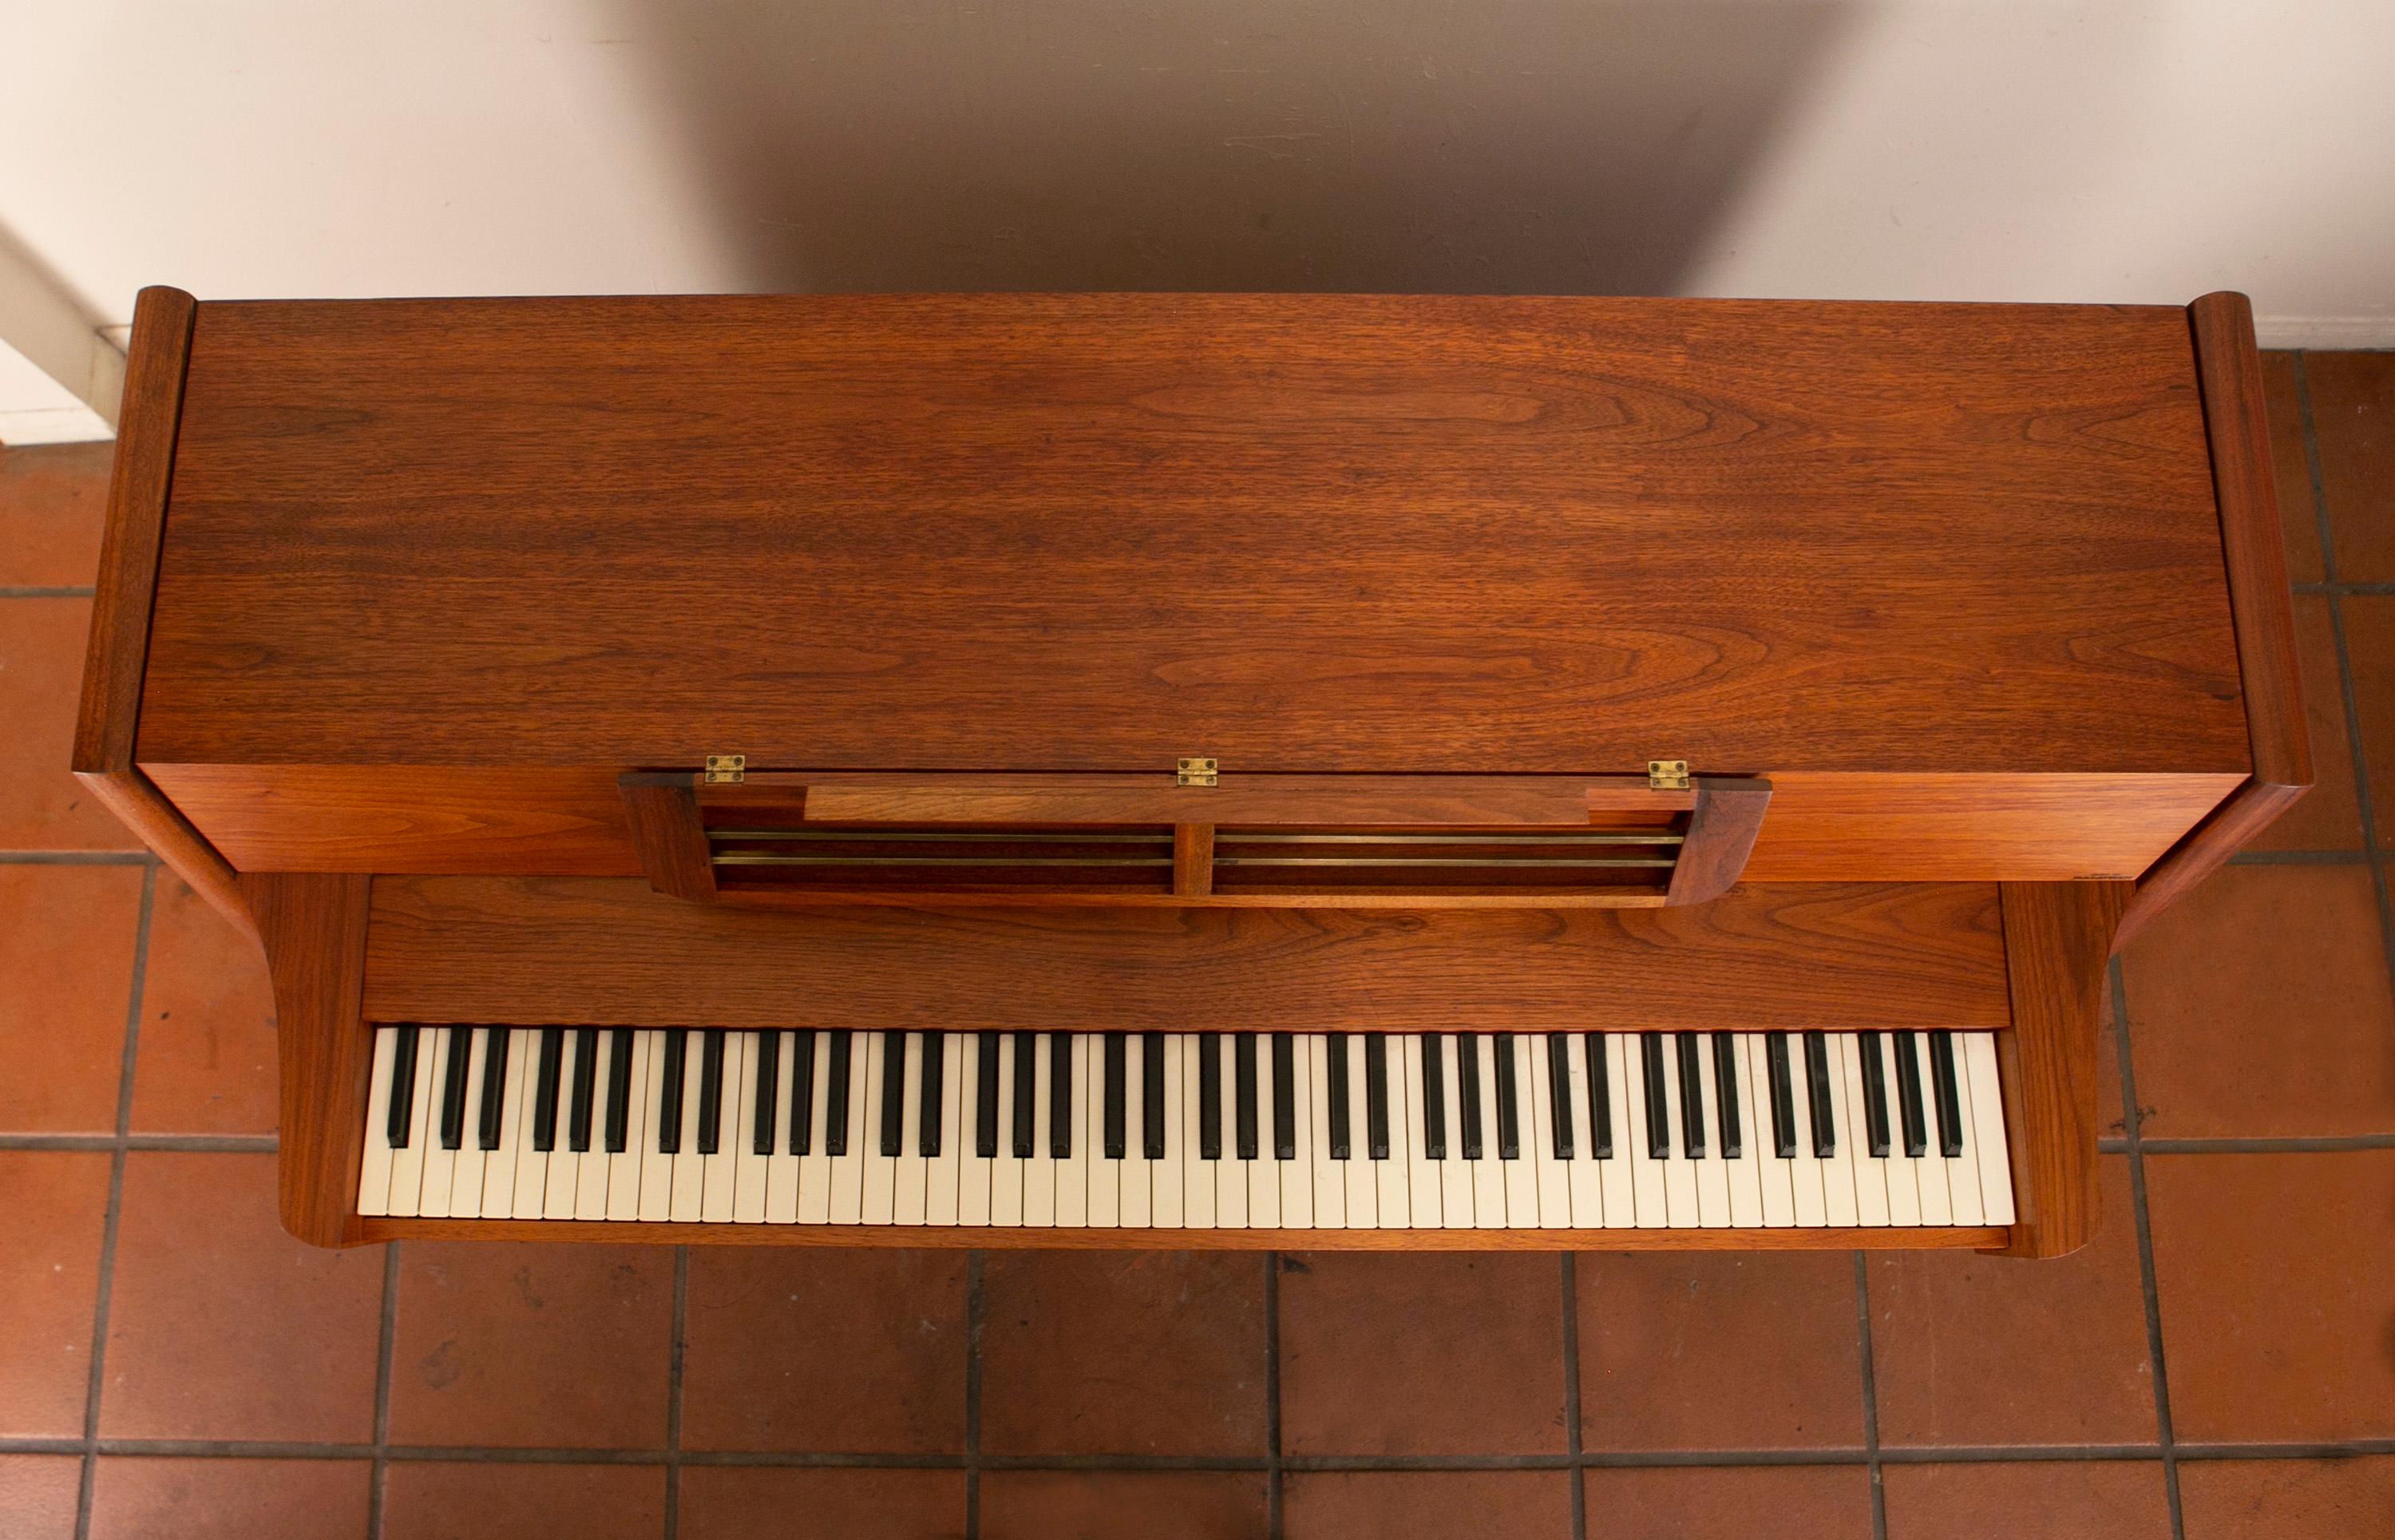 20th Century Mid-Century Modern Baldwin Acrosonic Piano with Bench in Walnut + Caning, 1960s